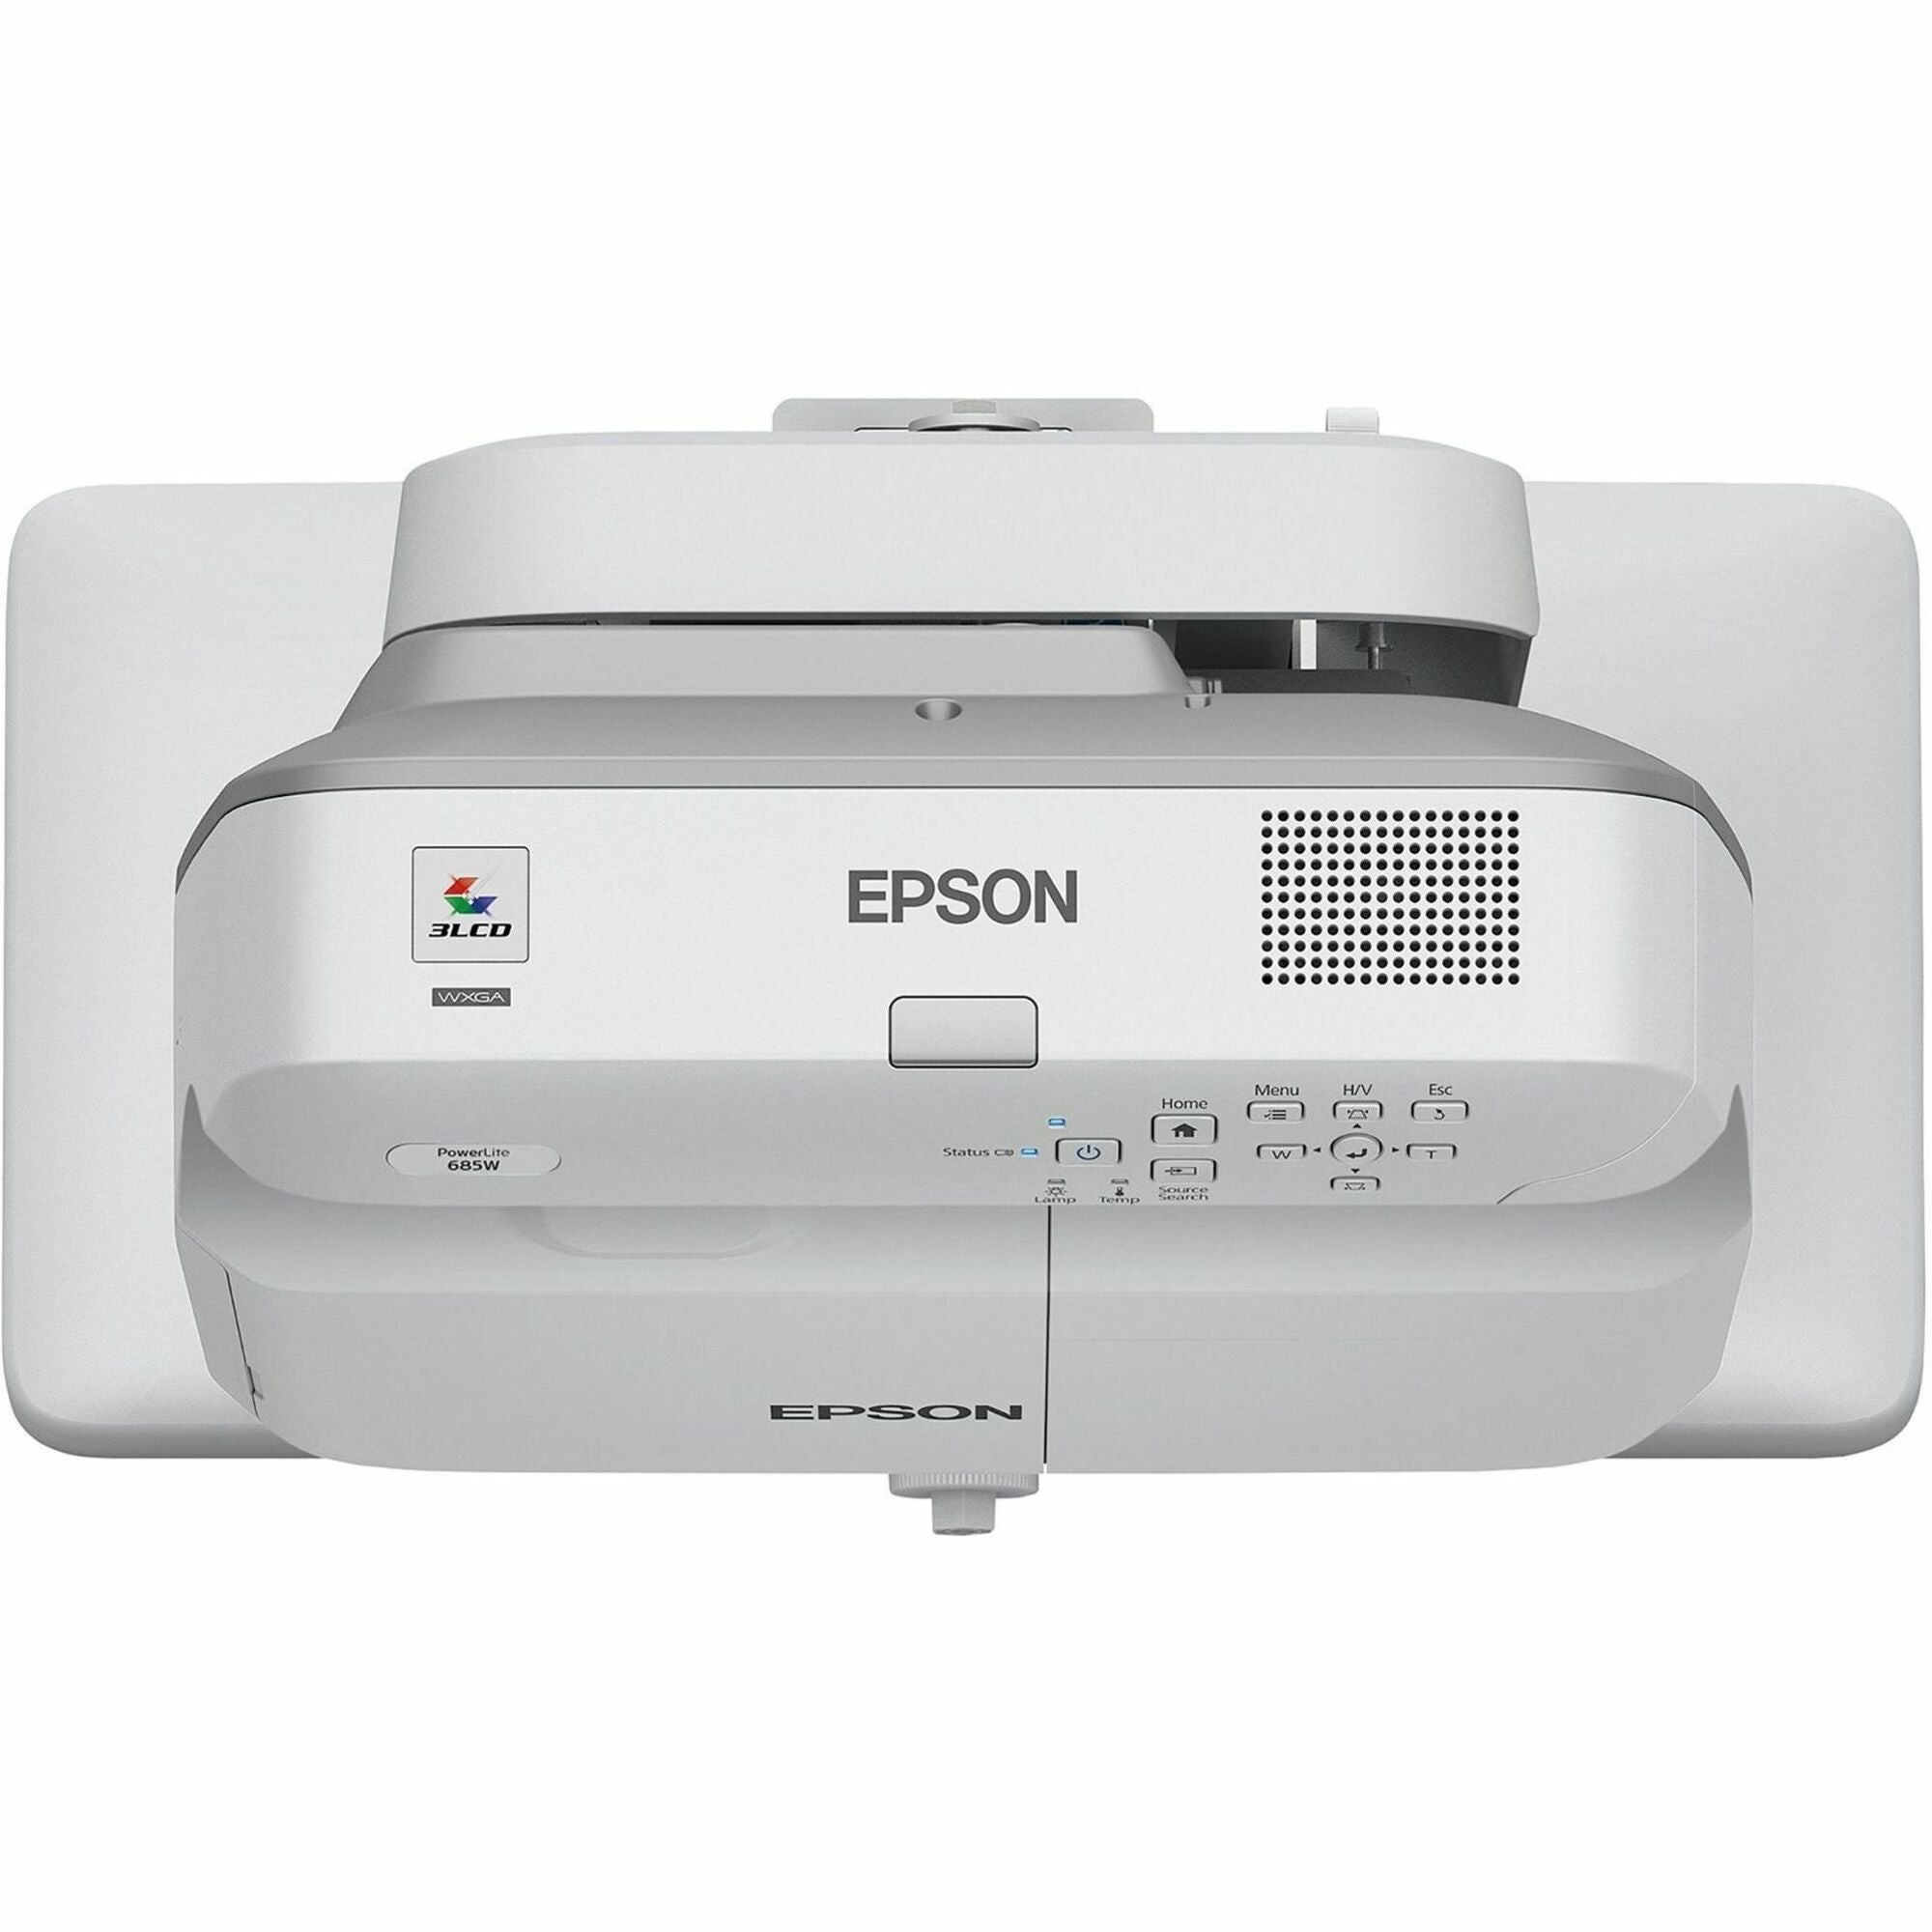 epson-powerlite-685w-ultra-short-throw-lcd-projector-1610-1280-x-800-rear-front-5000-hour-normal-mode-10000-hour-economy-mode-wxga-3500-lm-hdmi-usb_epsv11h744520 - 1